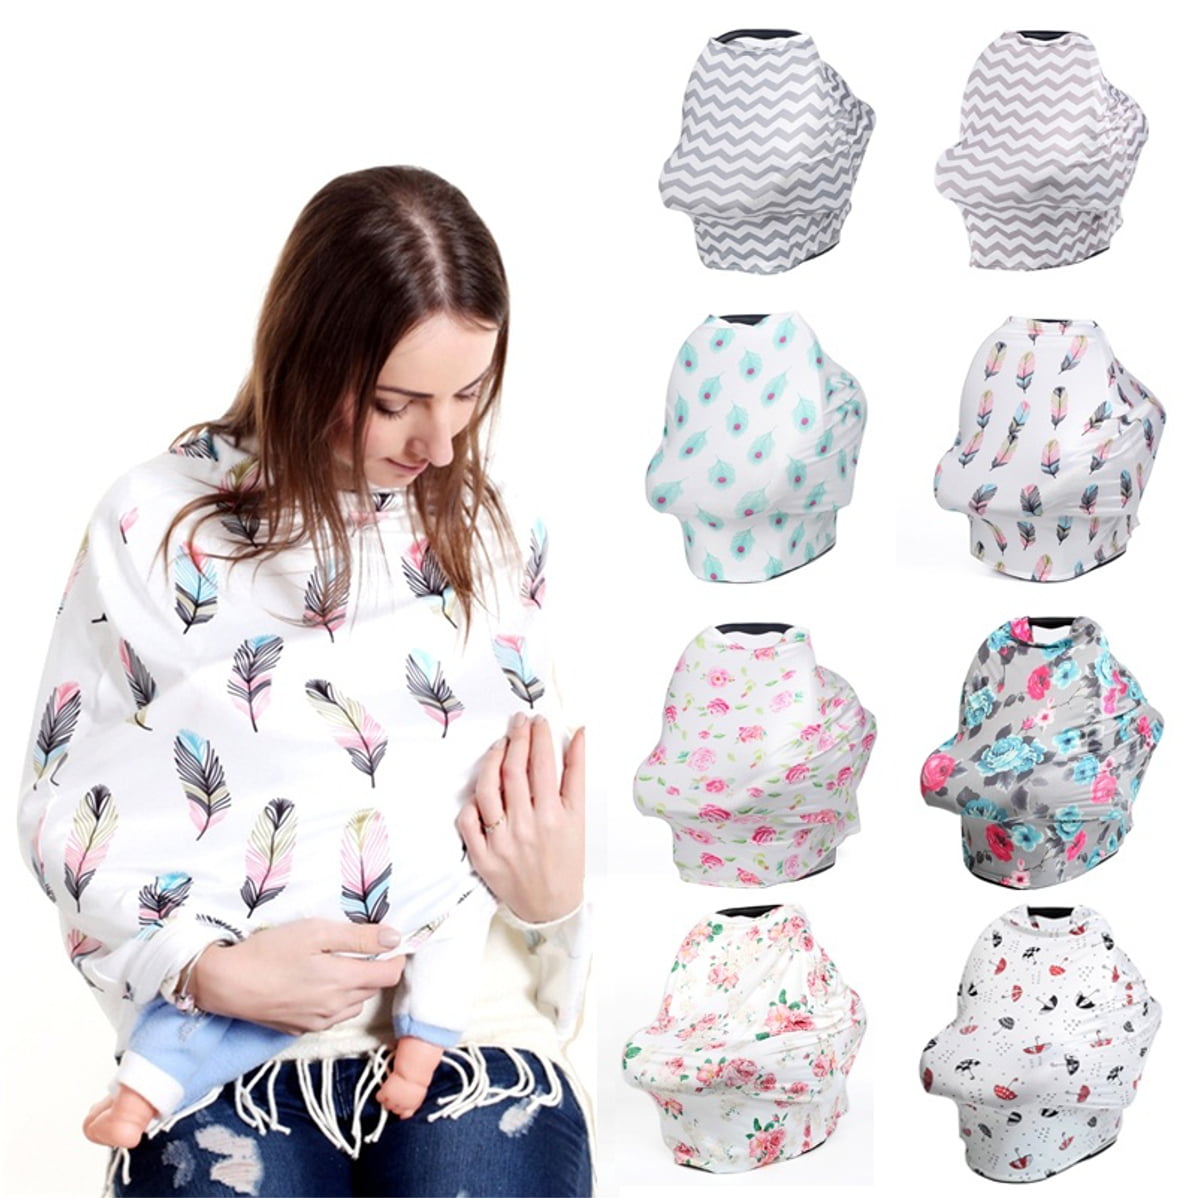 5in1 Nursing Scarf Cover Up Apron for Breastfeeding & Baby Car Seat Canopy Cover 